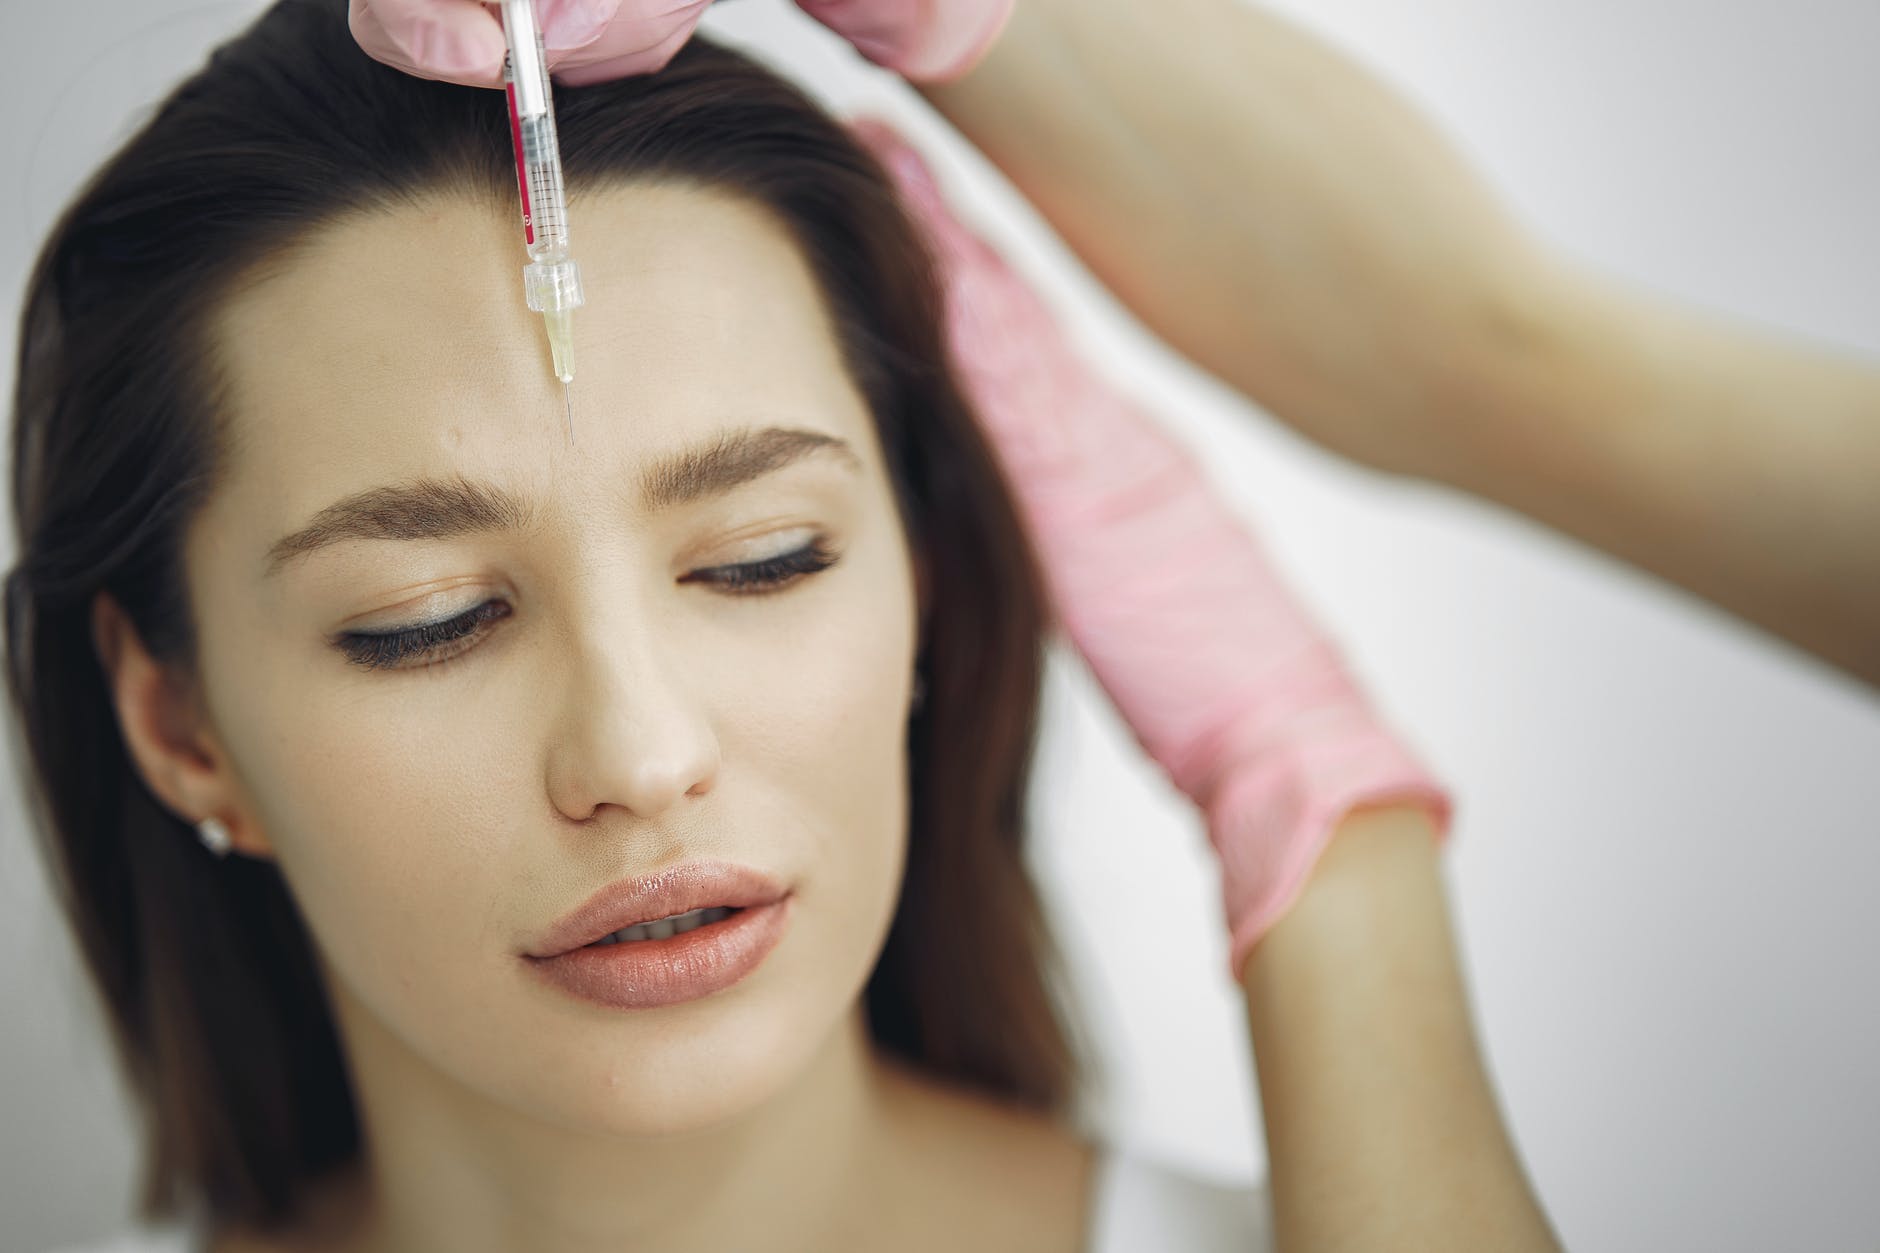 Dubai’s Beauty Oasis: Dermal Fillers for a Flawless You